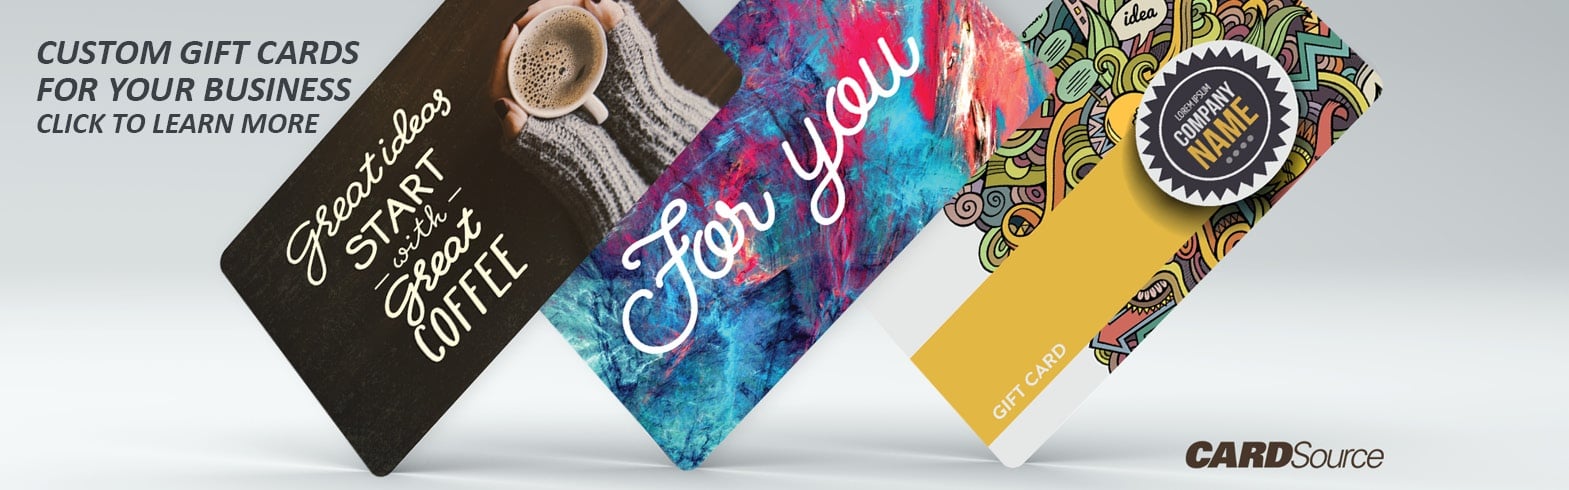 Personalized Gift Voucher | Personalized Gift Card | Voucher Gift Card | Gift  Certificate - Cards & Invitations - Aliexpress